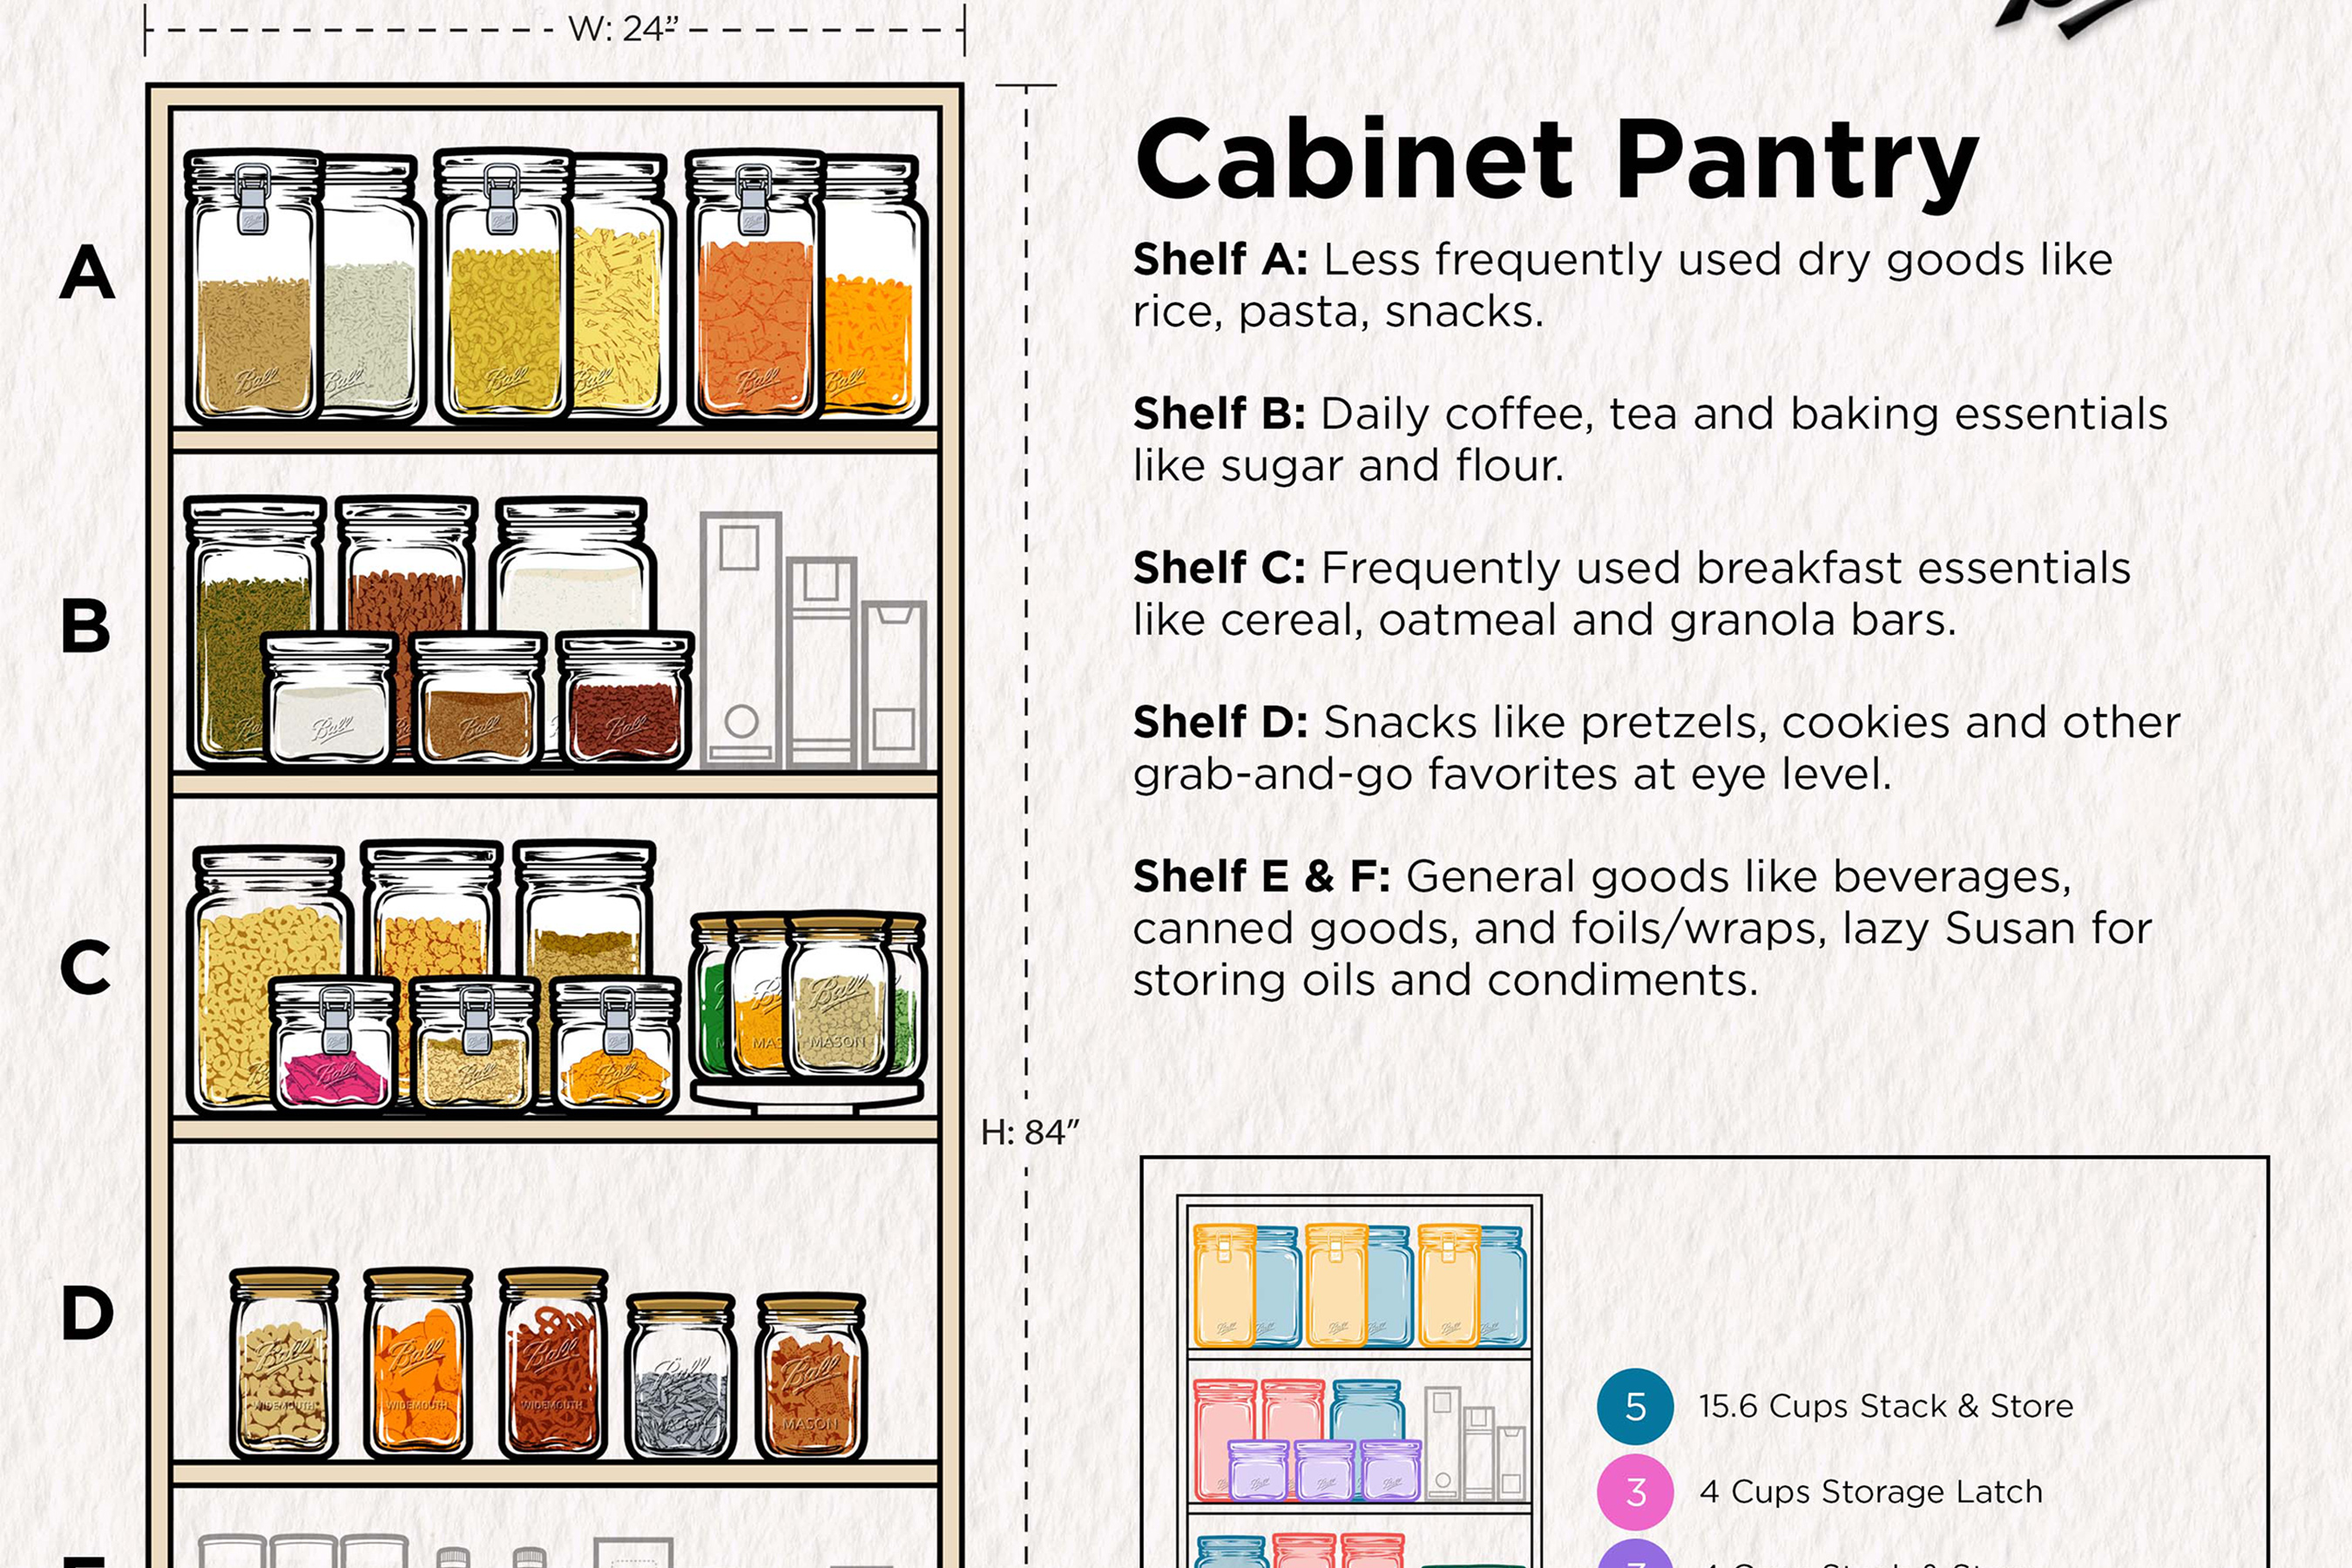 The makers of Ball® home canning are taking the guesswork out of pantry organization with blueprint for setting up a cabinet pantry. Layout courtesy of Kim Bui (@xomyhome).